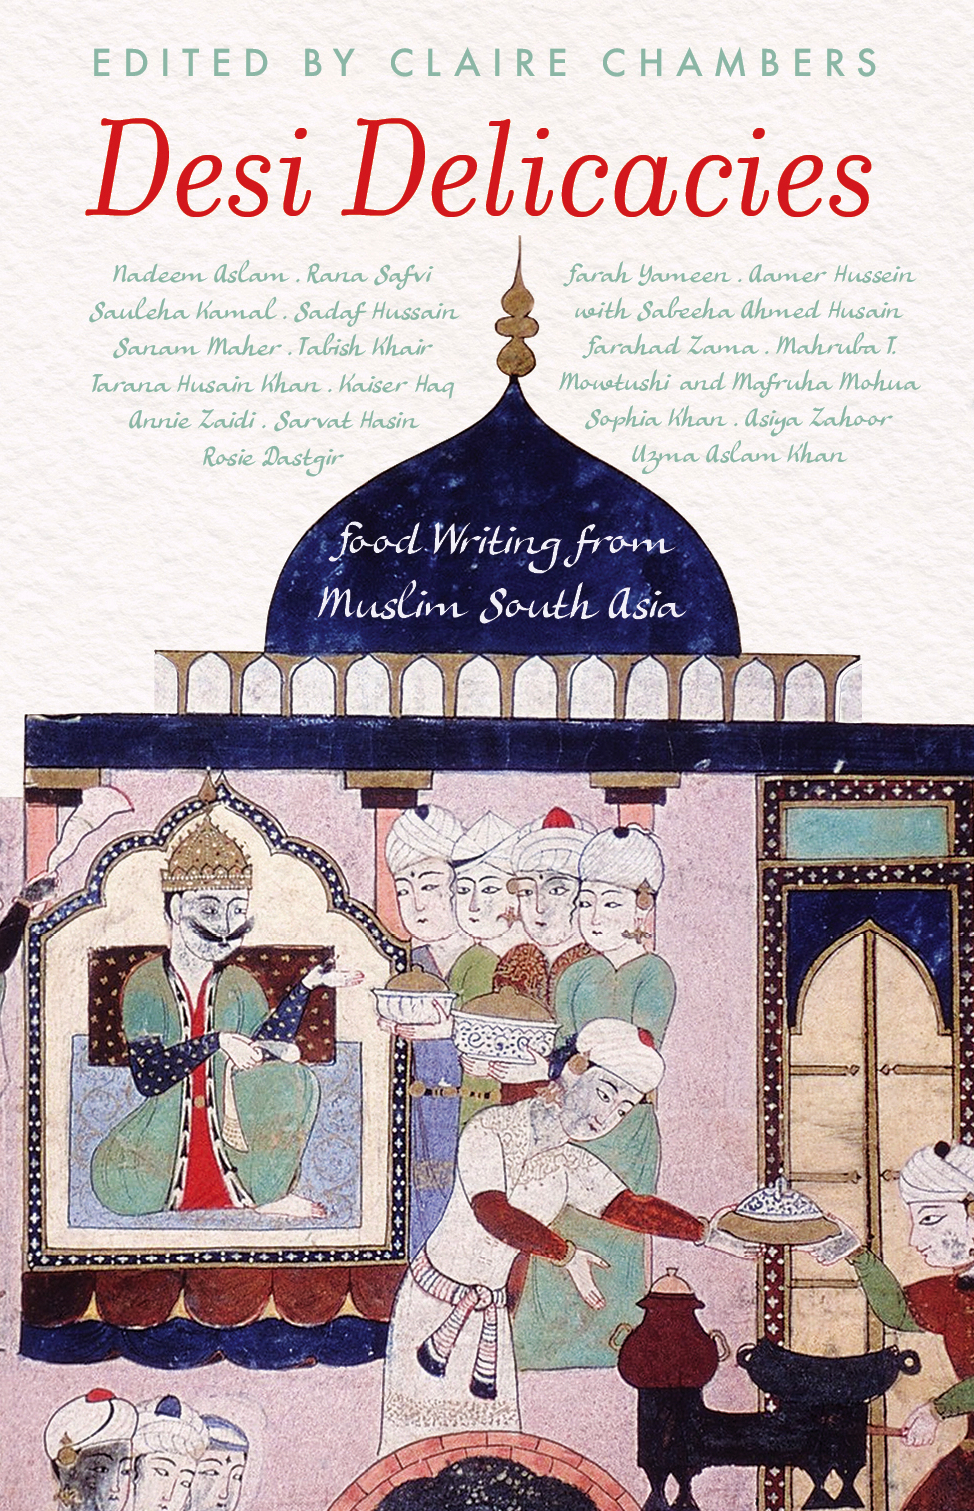 Desi Delicacies: Food Writing from Muslim South Asia Paperback – 21 December 2020 by Claire Chambers (Author)